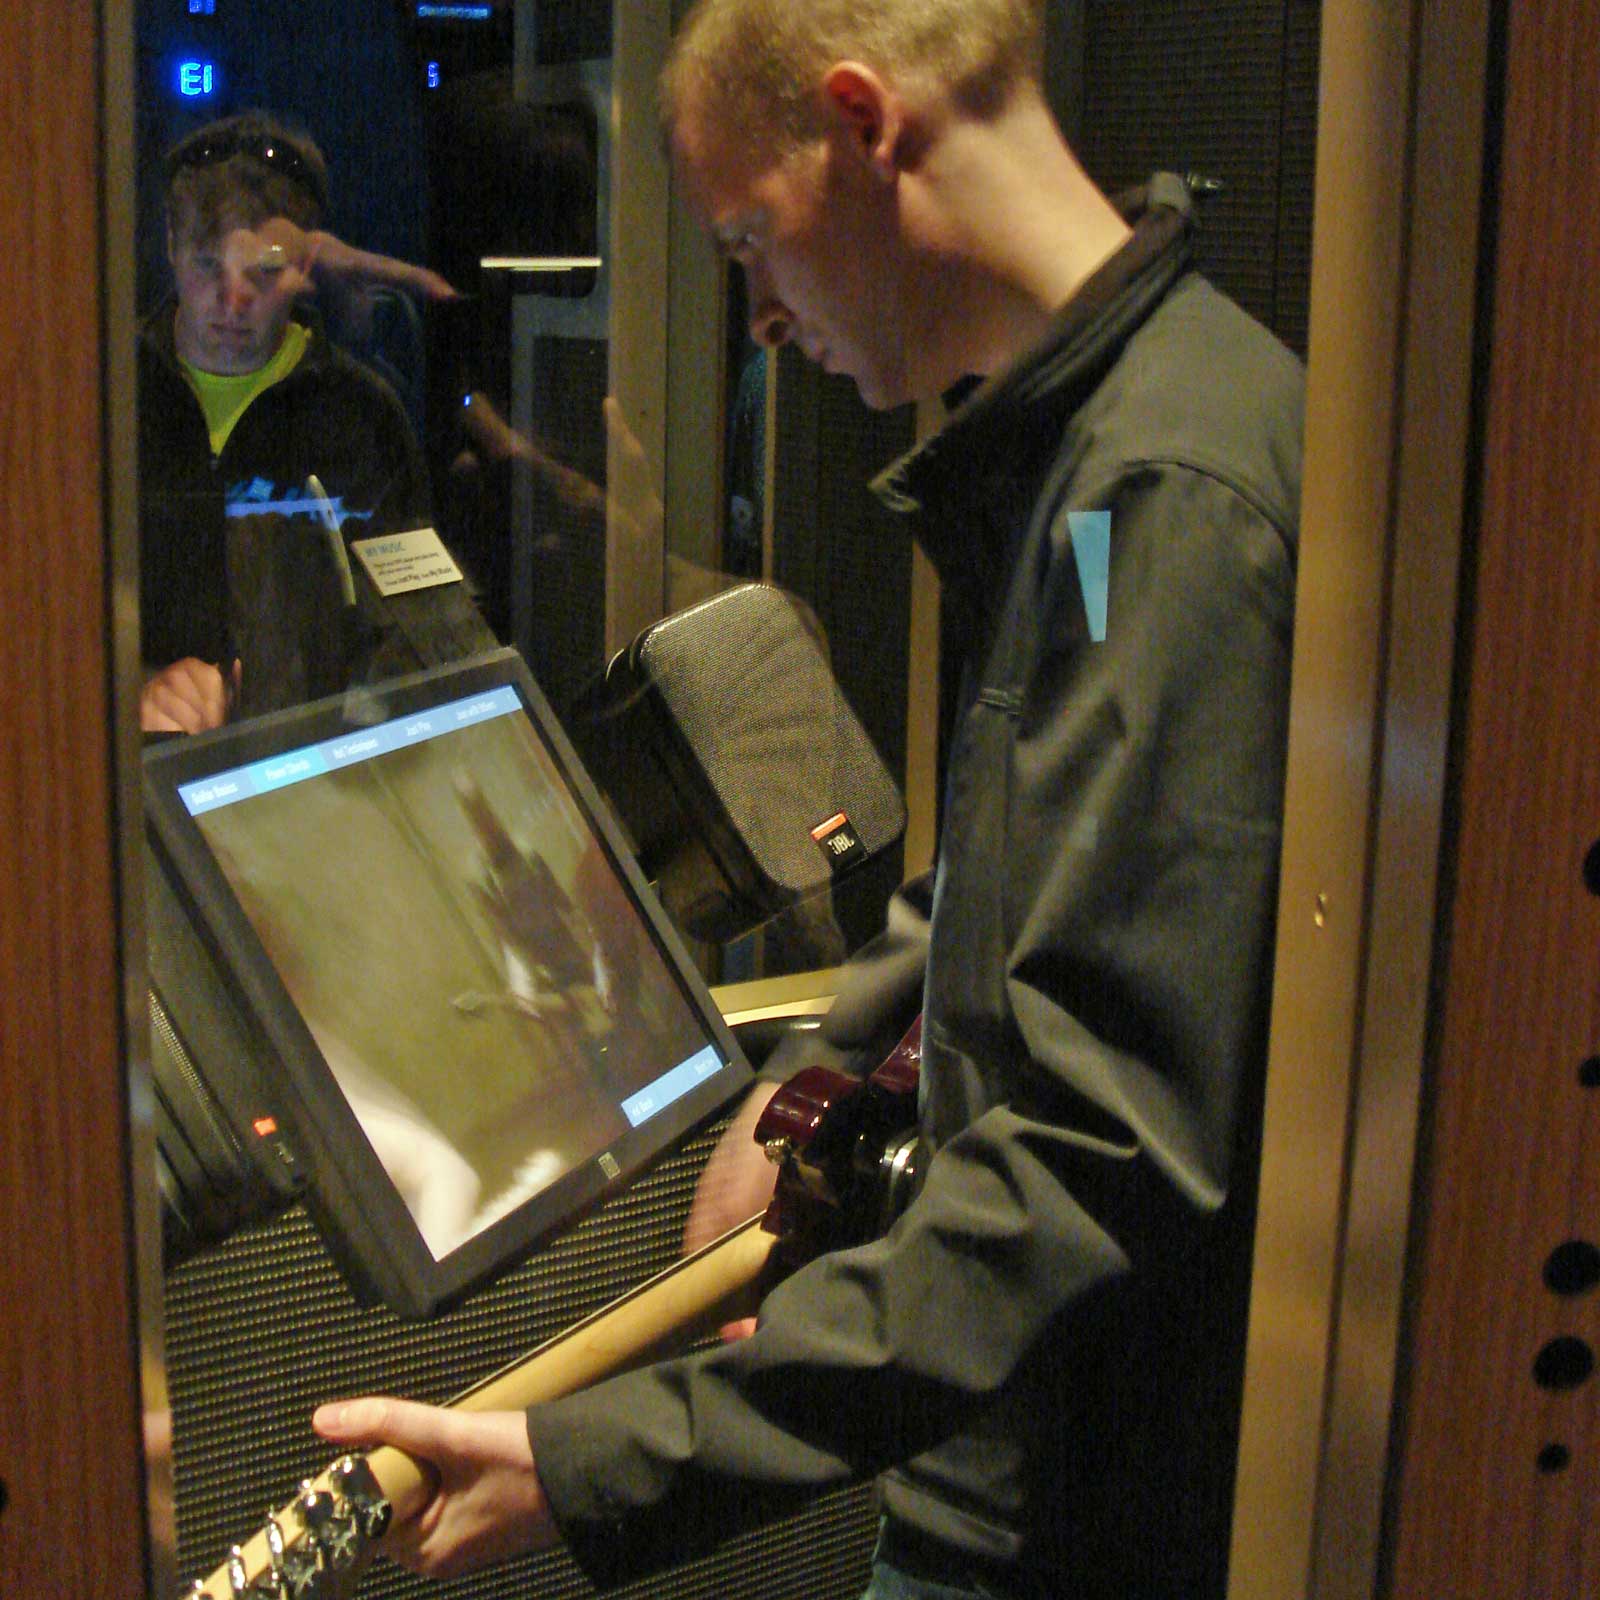 William playing guitar in a sound booth